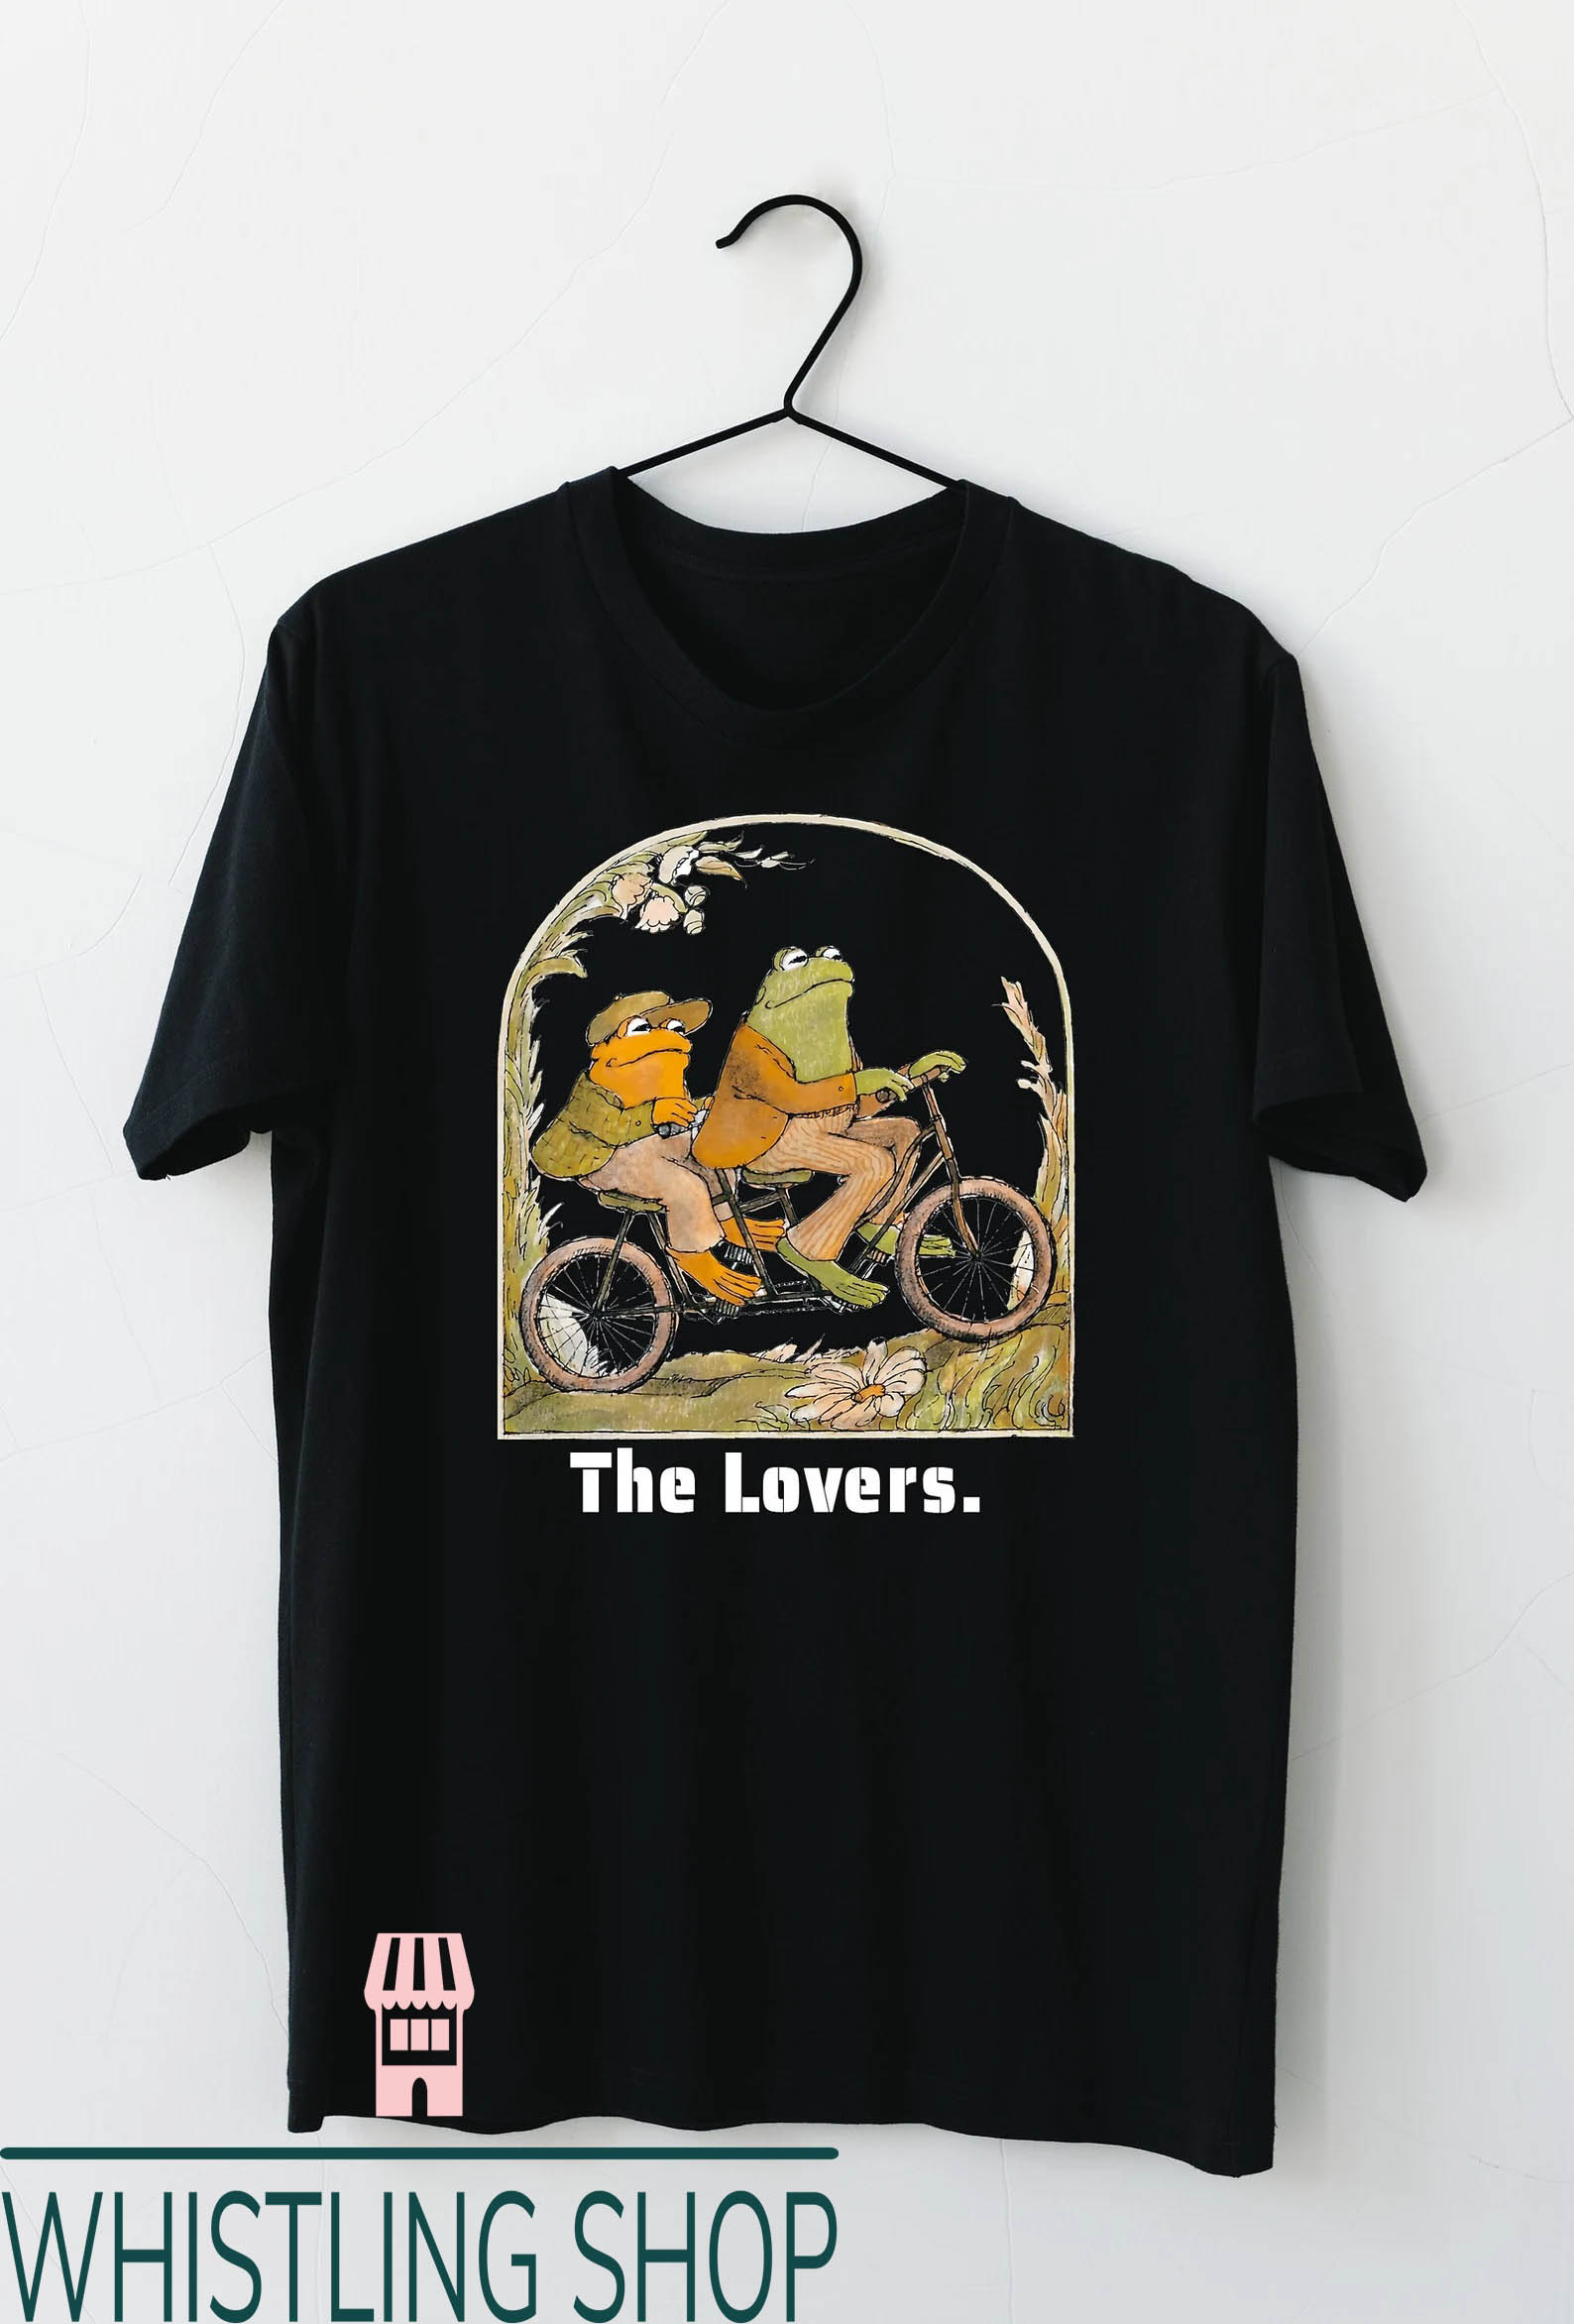 Frog And Toad T-Shirt The Lovers Frog And Toad Cycling Shirt